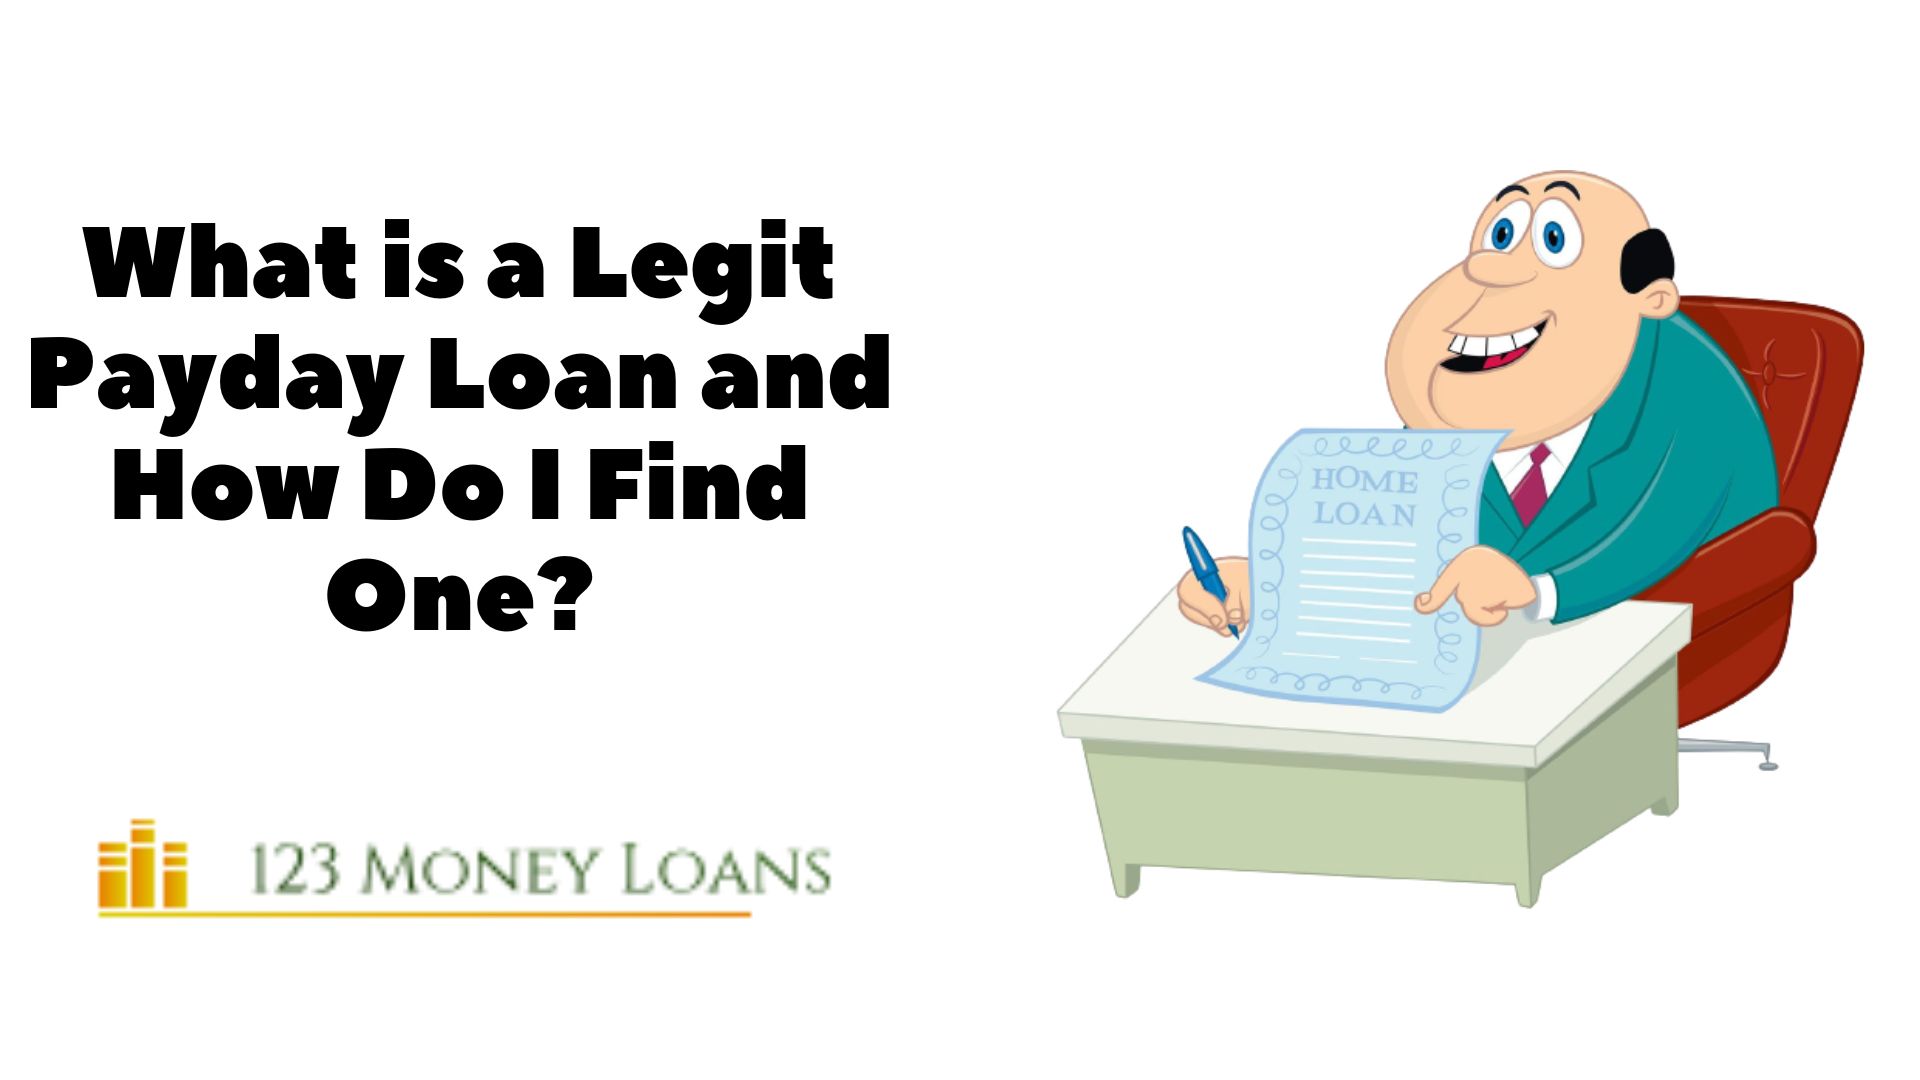 What is a Legit Payday Loan and How Do I Find One?